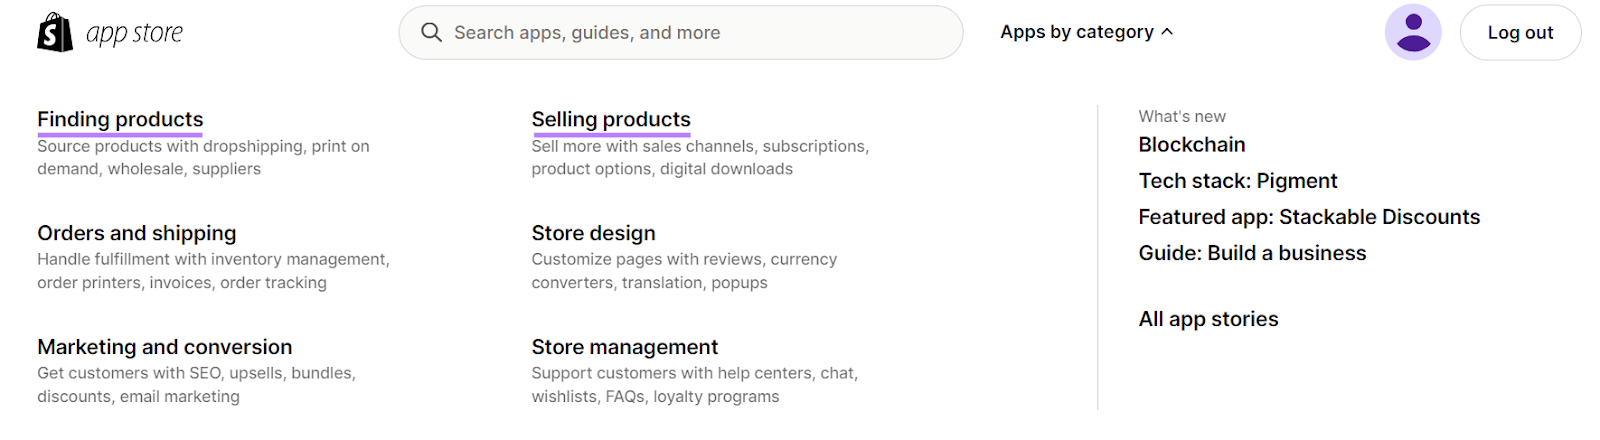 Shopify’s App Store